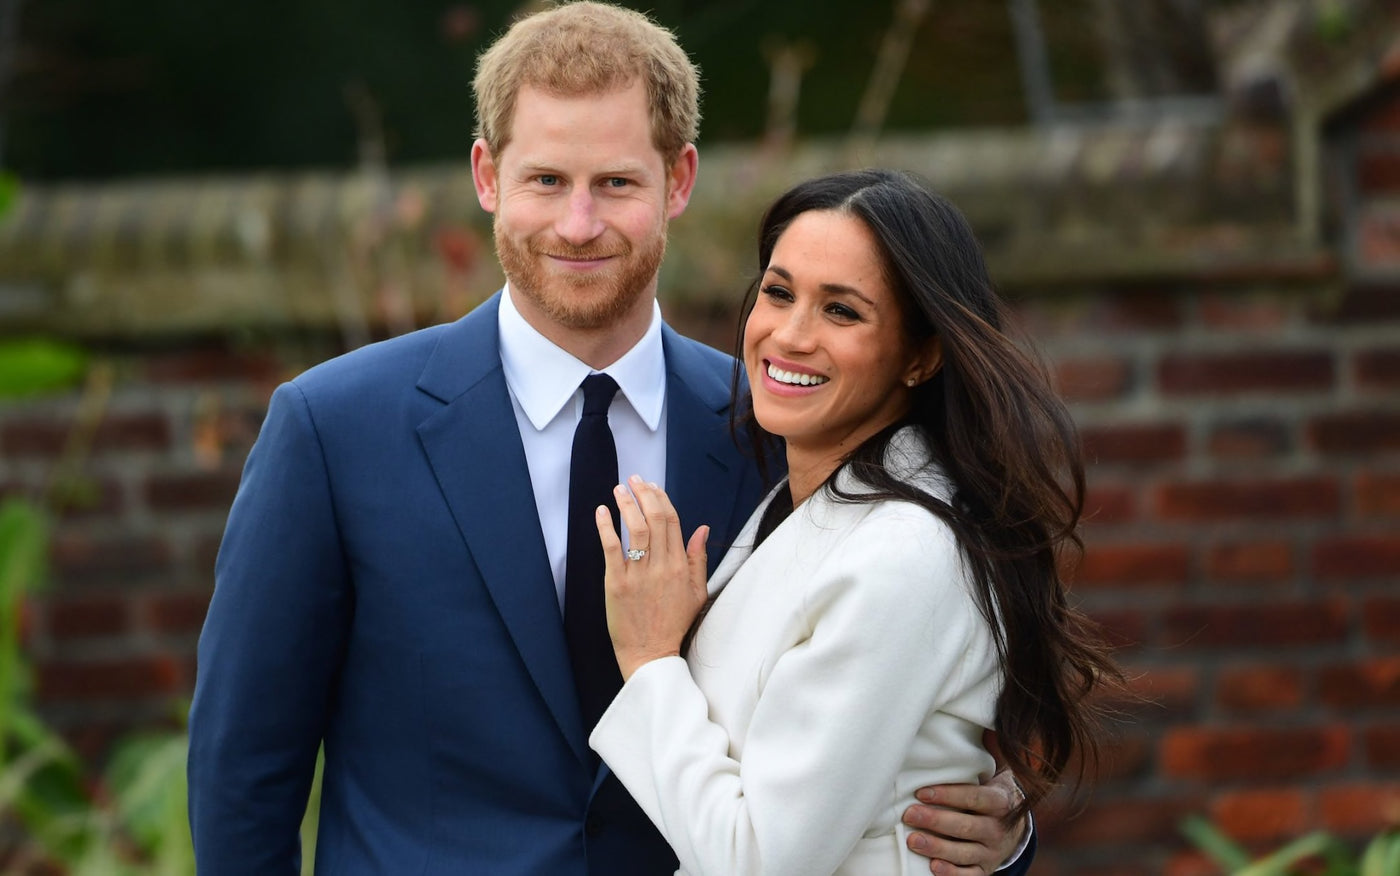 Congratulations to Prince Harry and Meghan Markle!